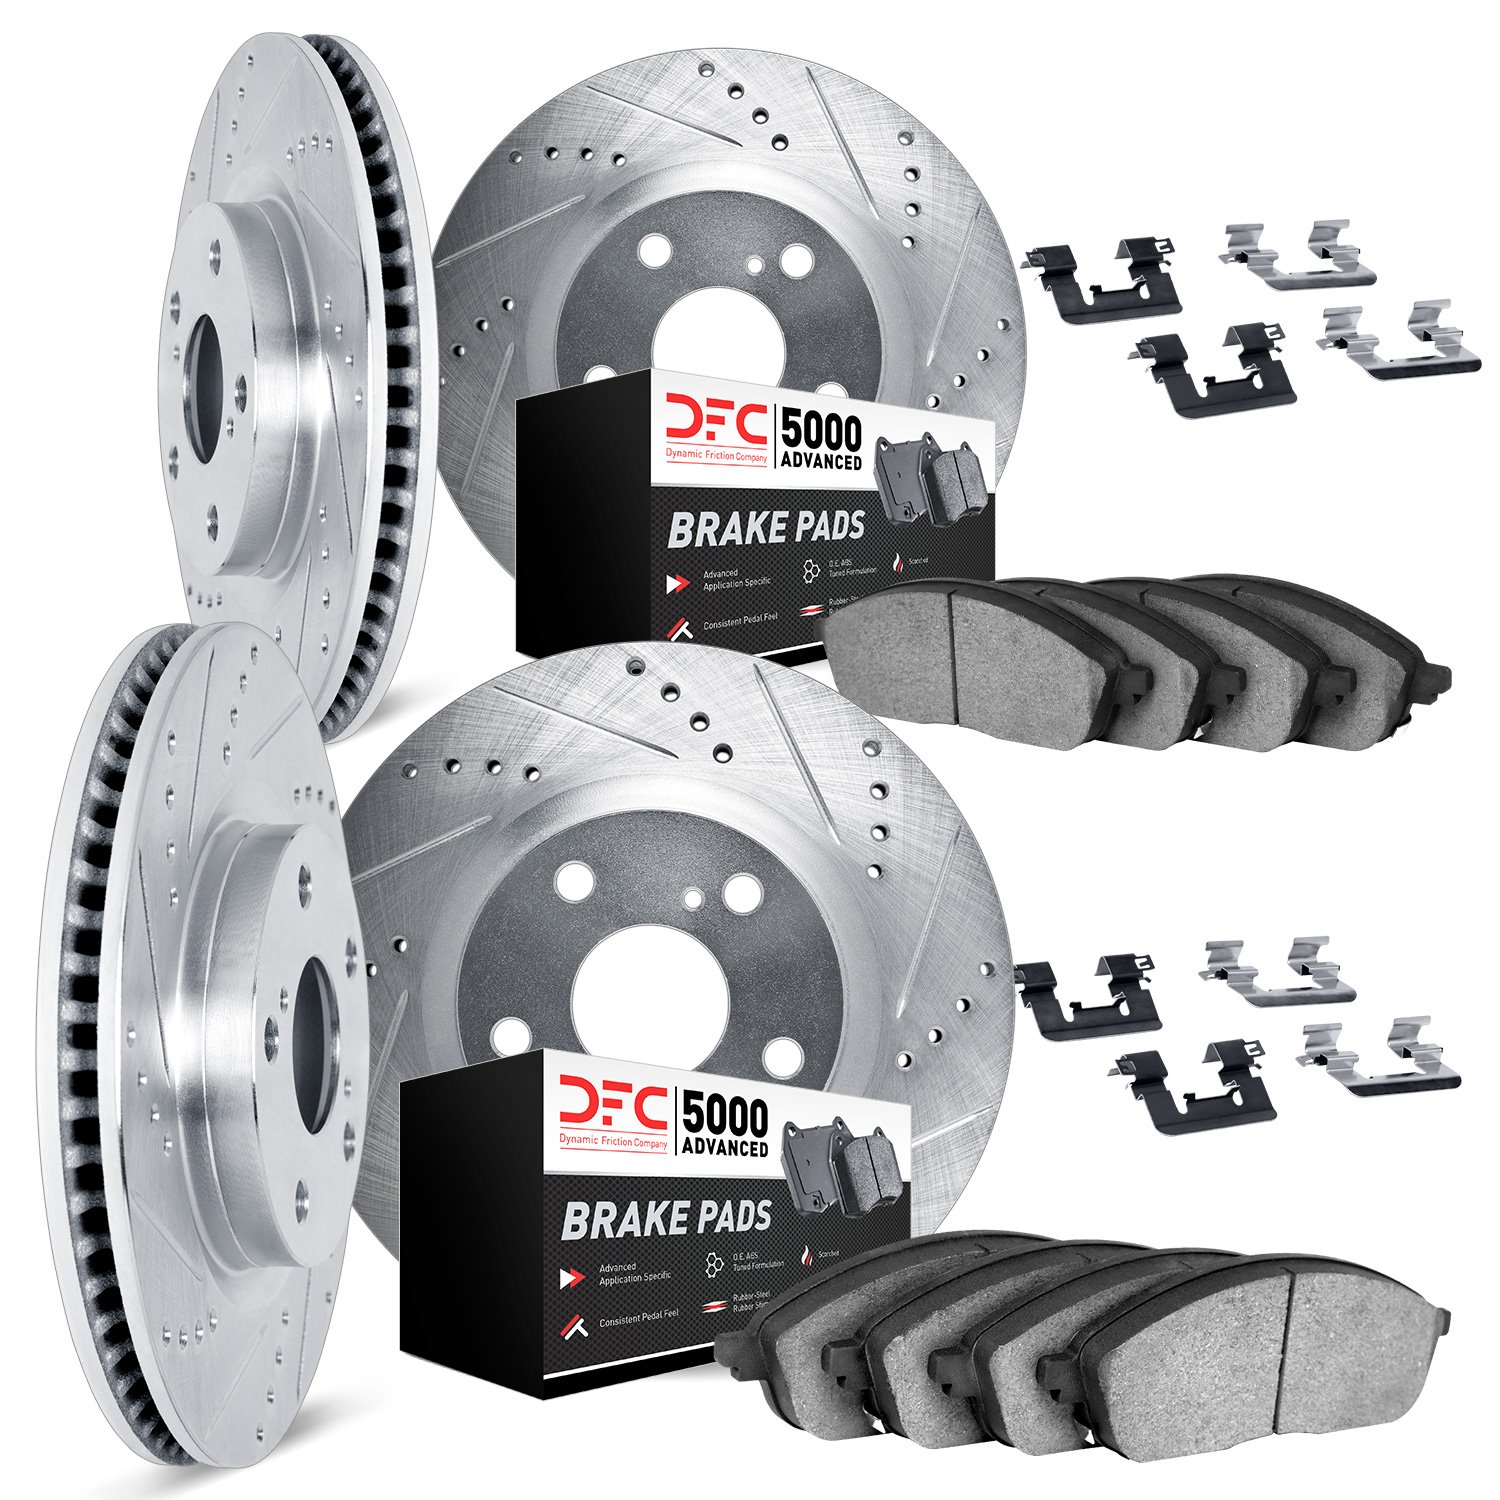 7514-31043 Drilled/Slotted Brake Rotors w/5000 Advanced Brake Pads Kit & Hardware [Silver], 2013-2018 BMW, Position: Front and R